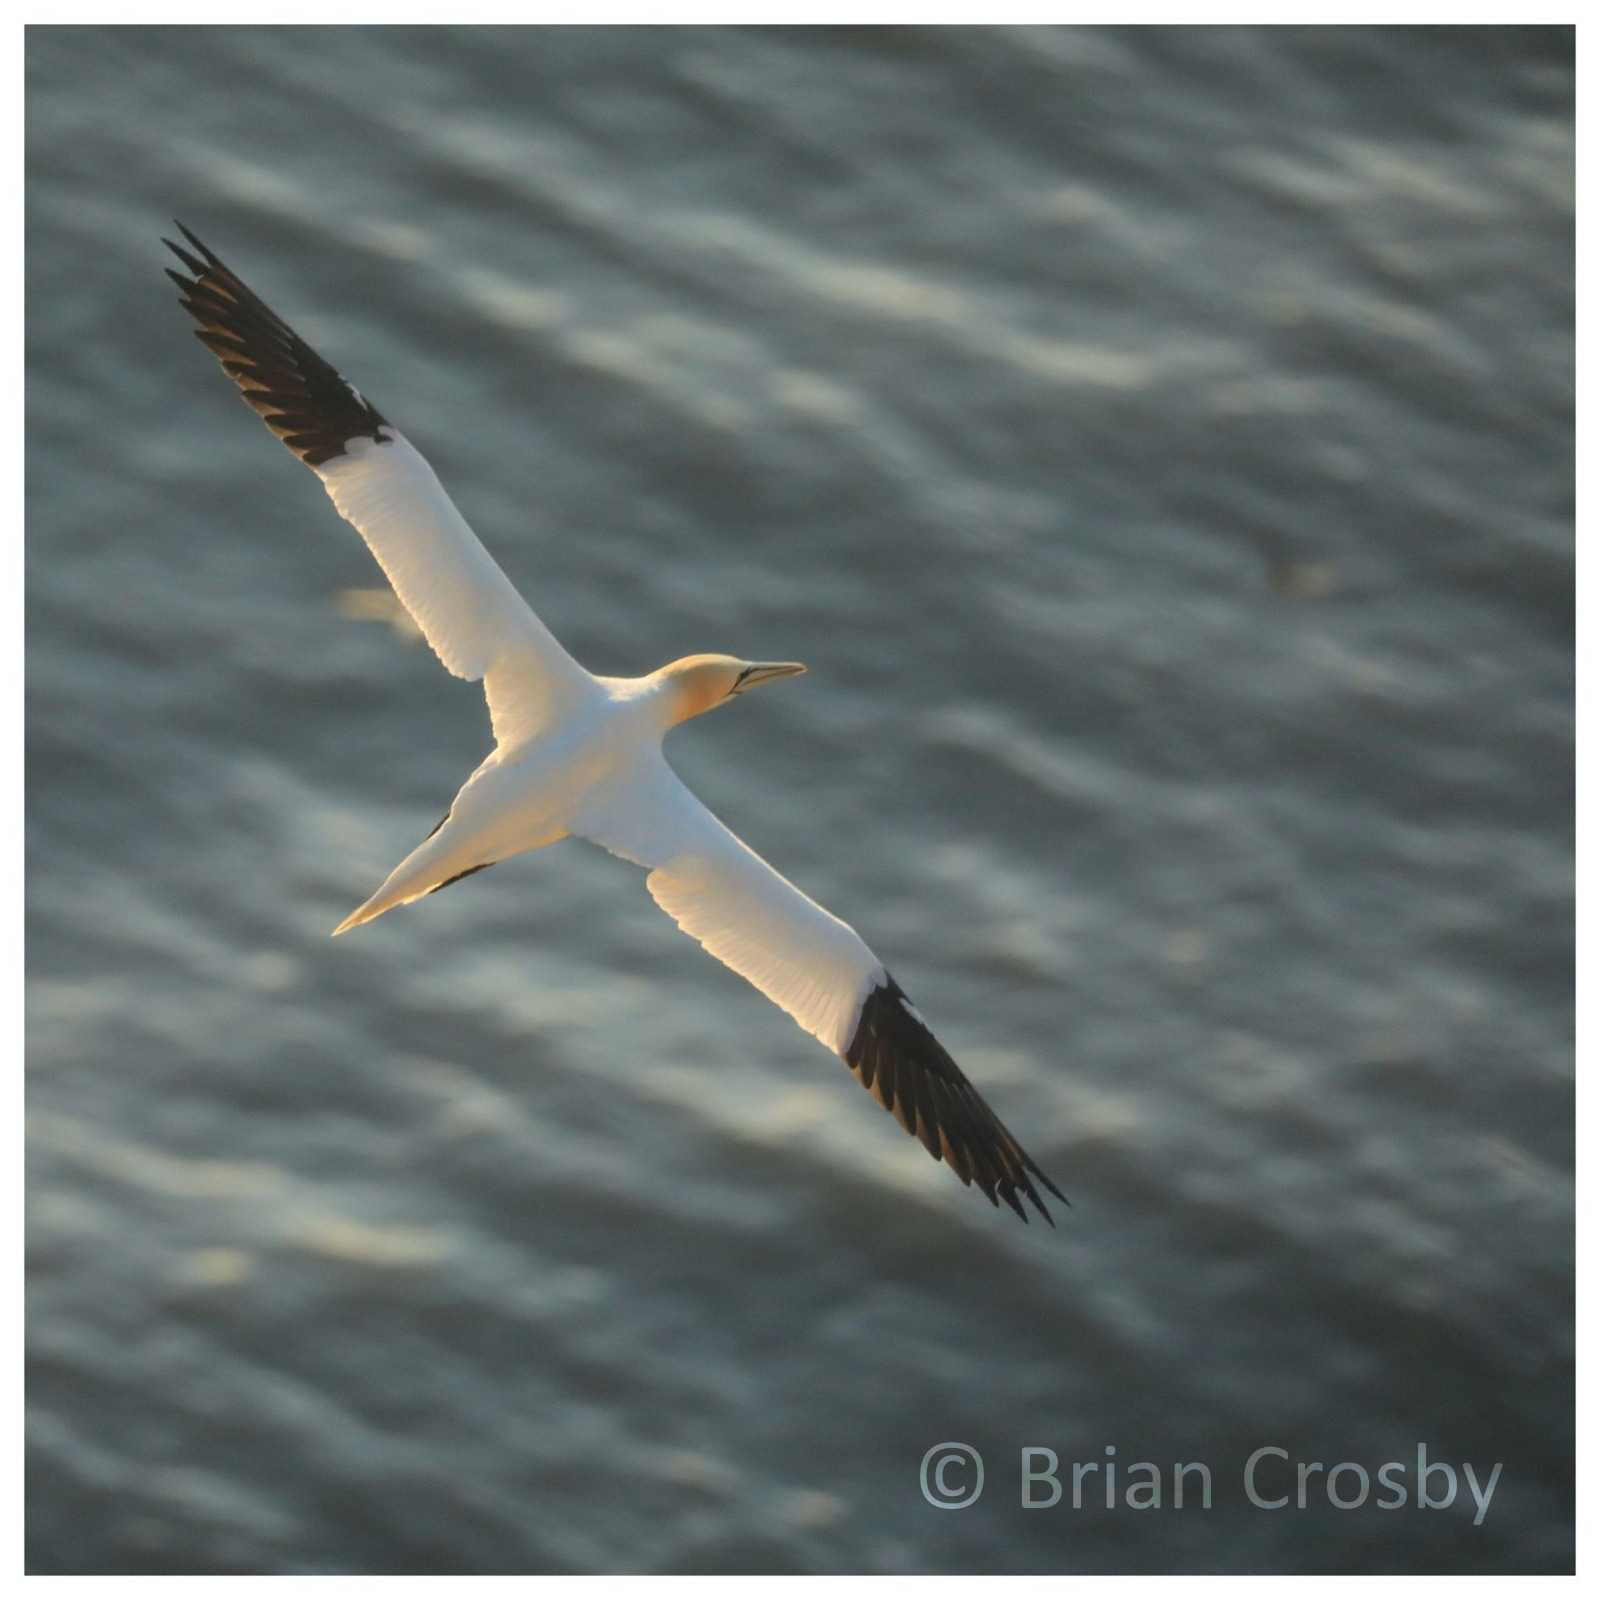 Photograph of a gannet in flight over the sea. Credit to Brian Crosby (@briancrosby163)